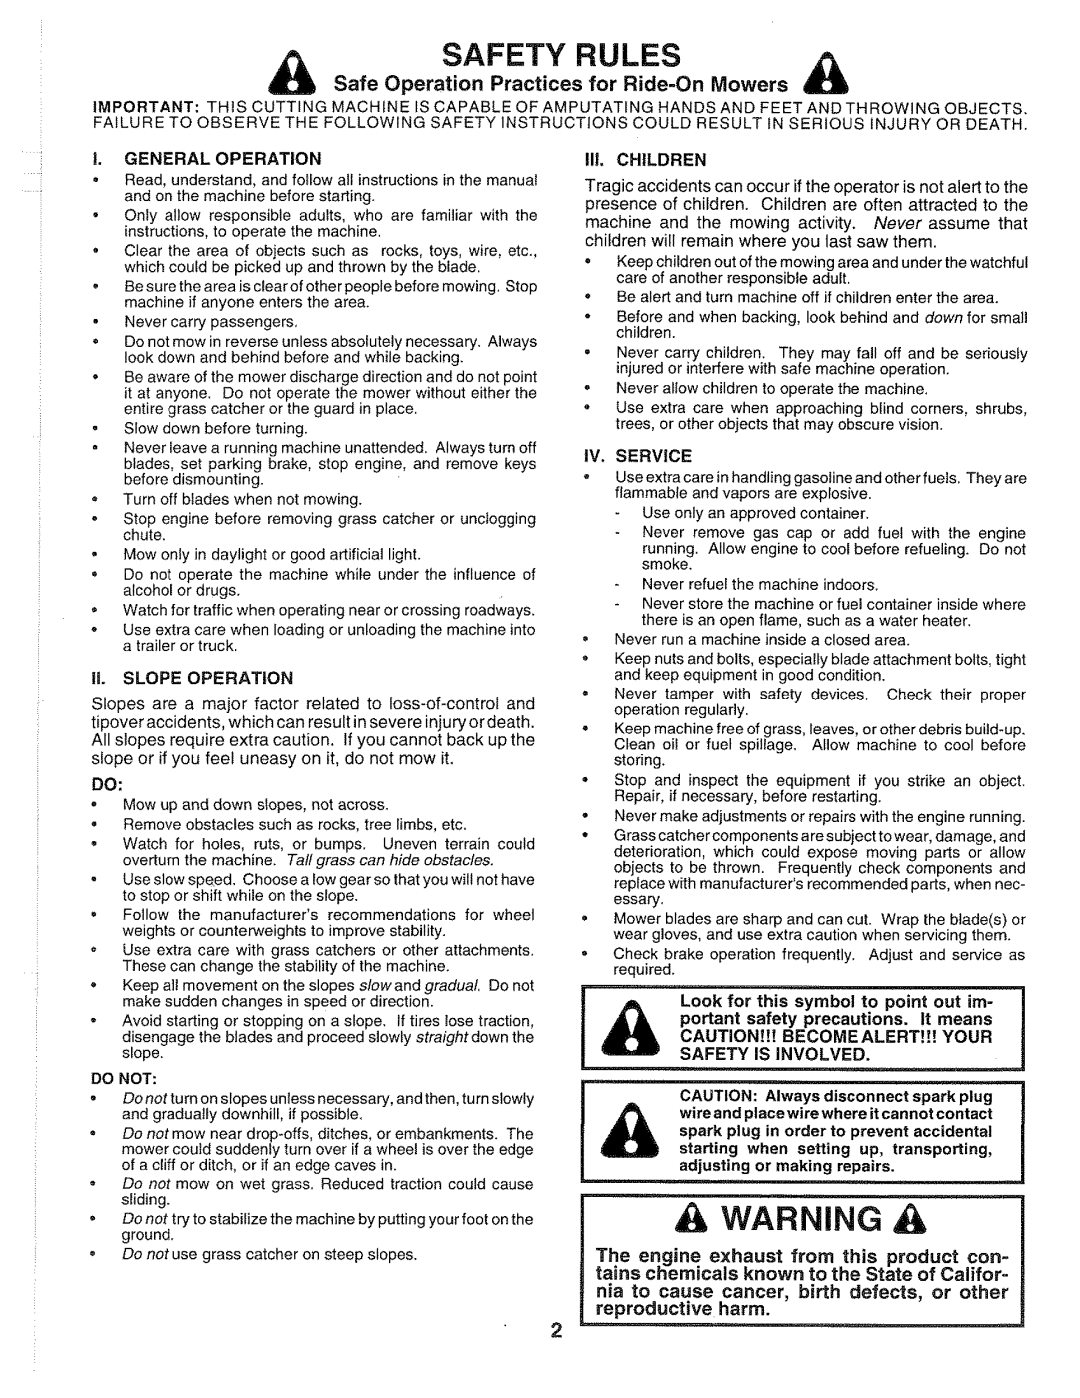 Sears 917.2565 A Warning, Safety Rules, Safe Operation Practices for Ride-OnMowers, IlL CHILDREN, The engine, reproductive 